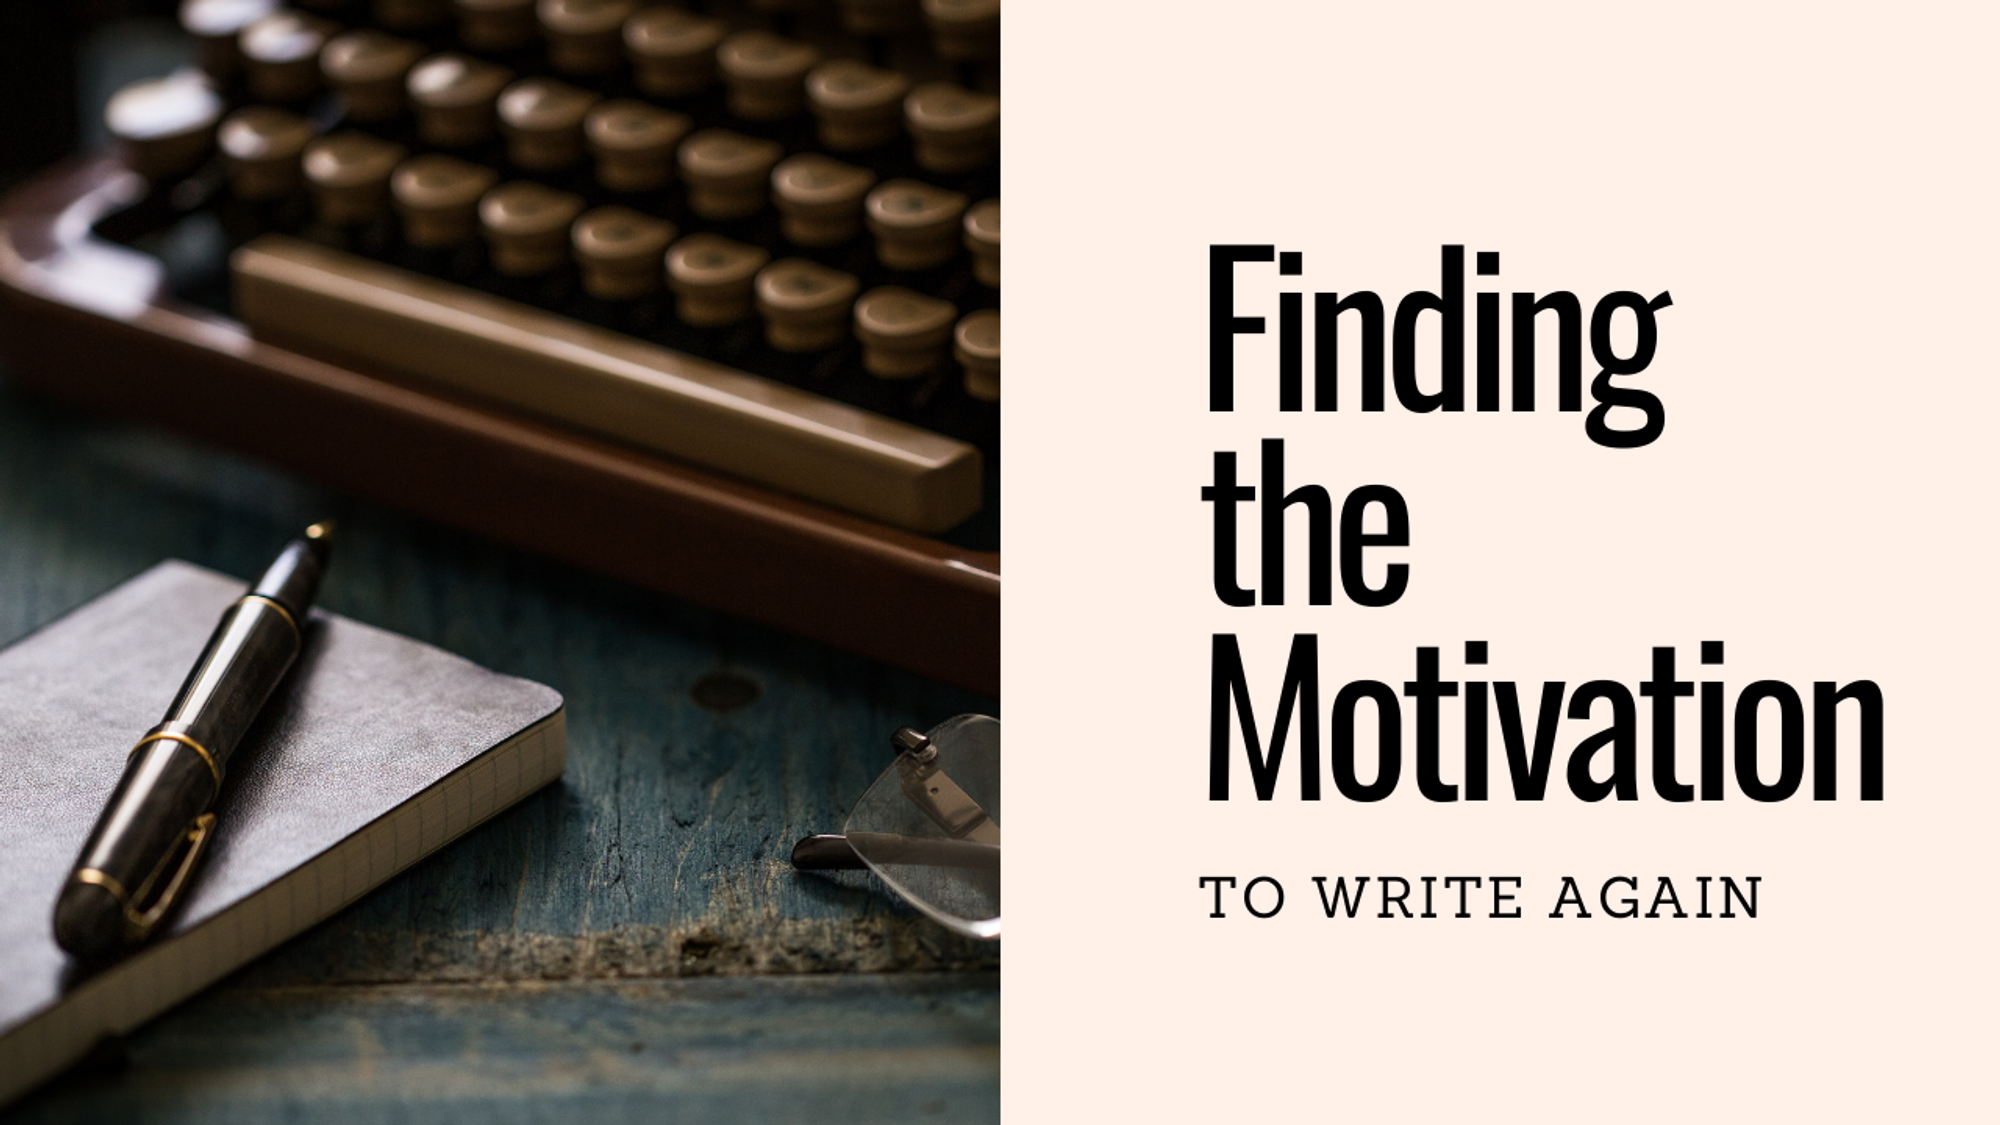 Finding the Motivation to Write Again